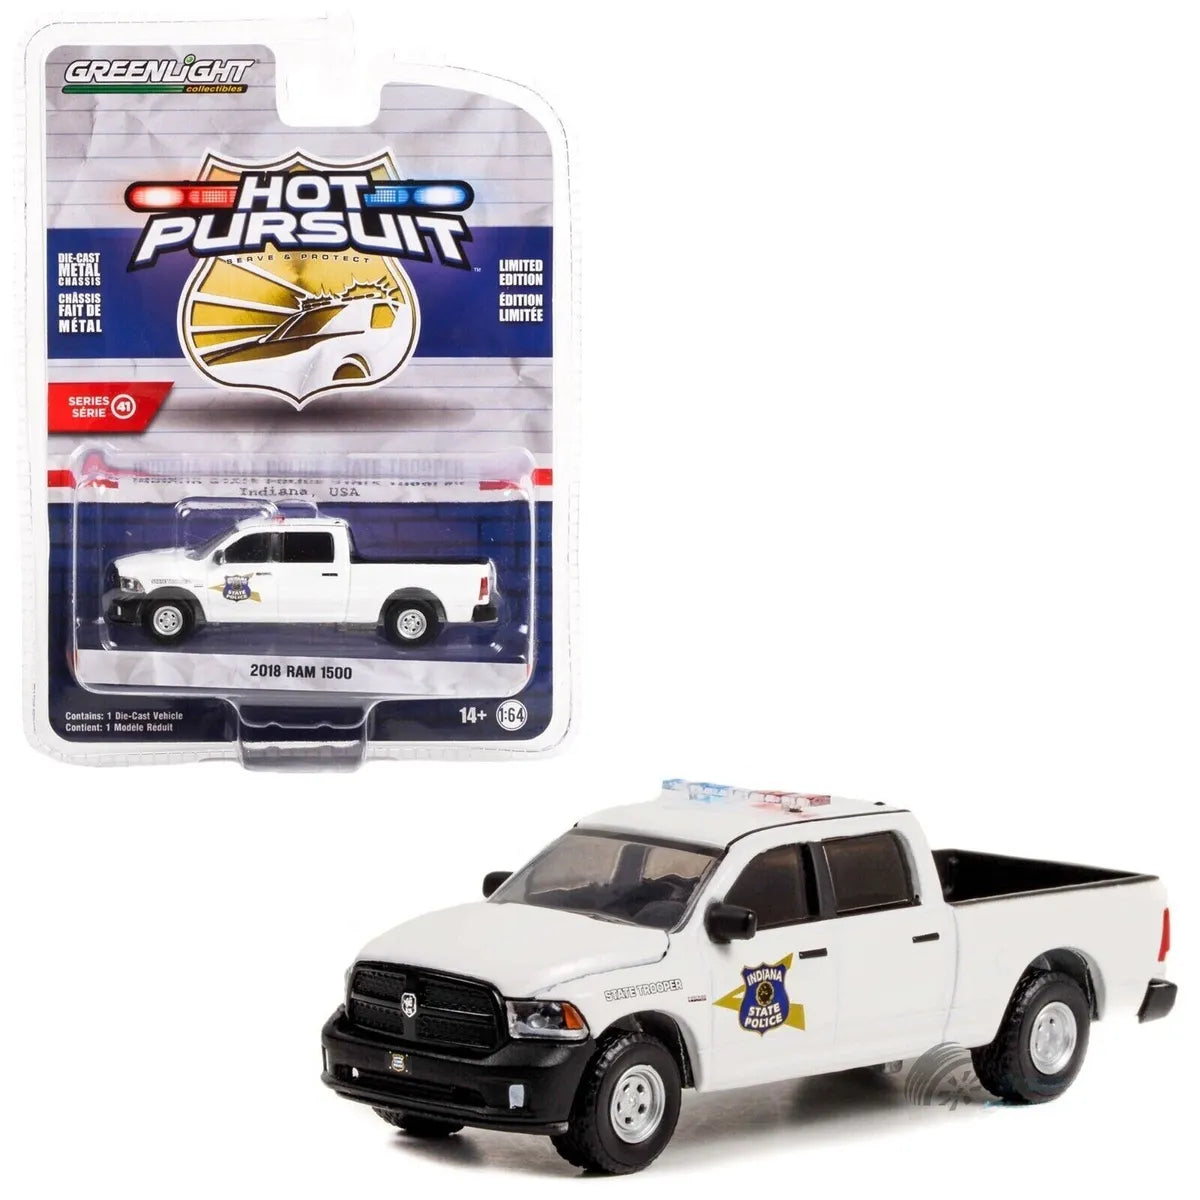 1/64 2018 RAM 1500 INDIANA STATE POLICE STATE TROOPER - HOT PURSUIT